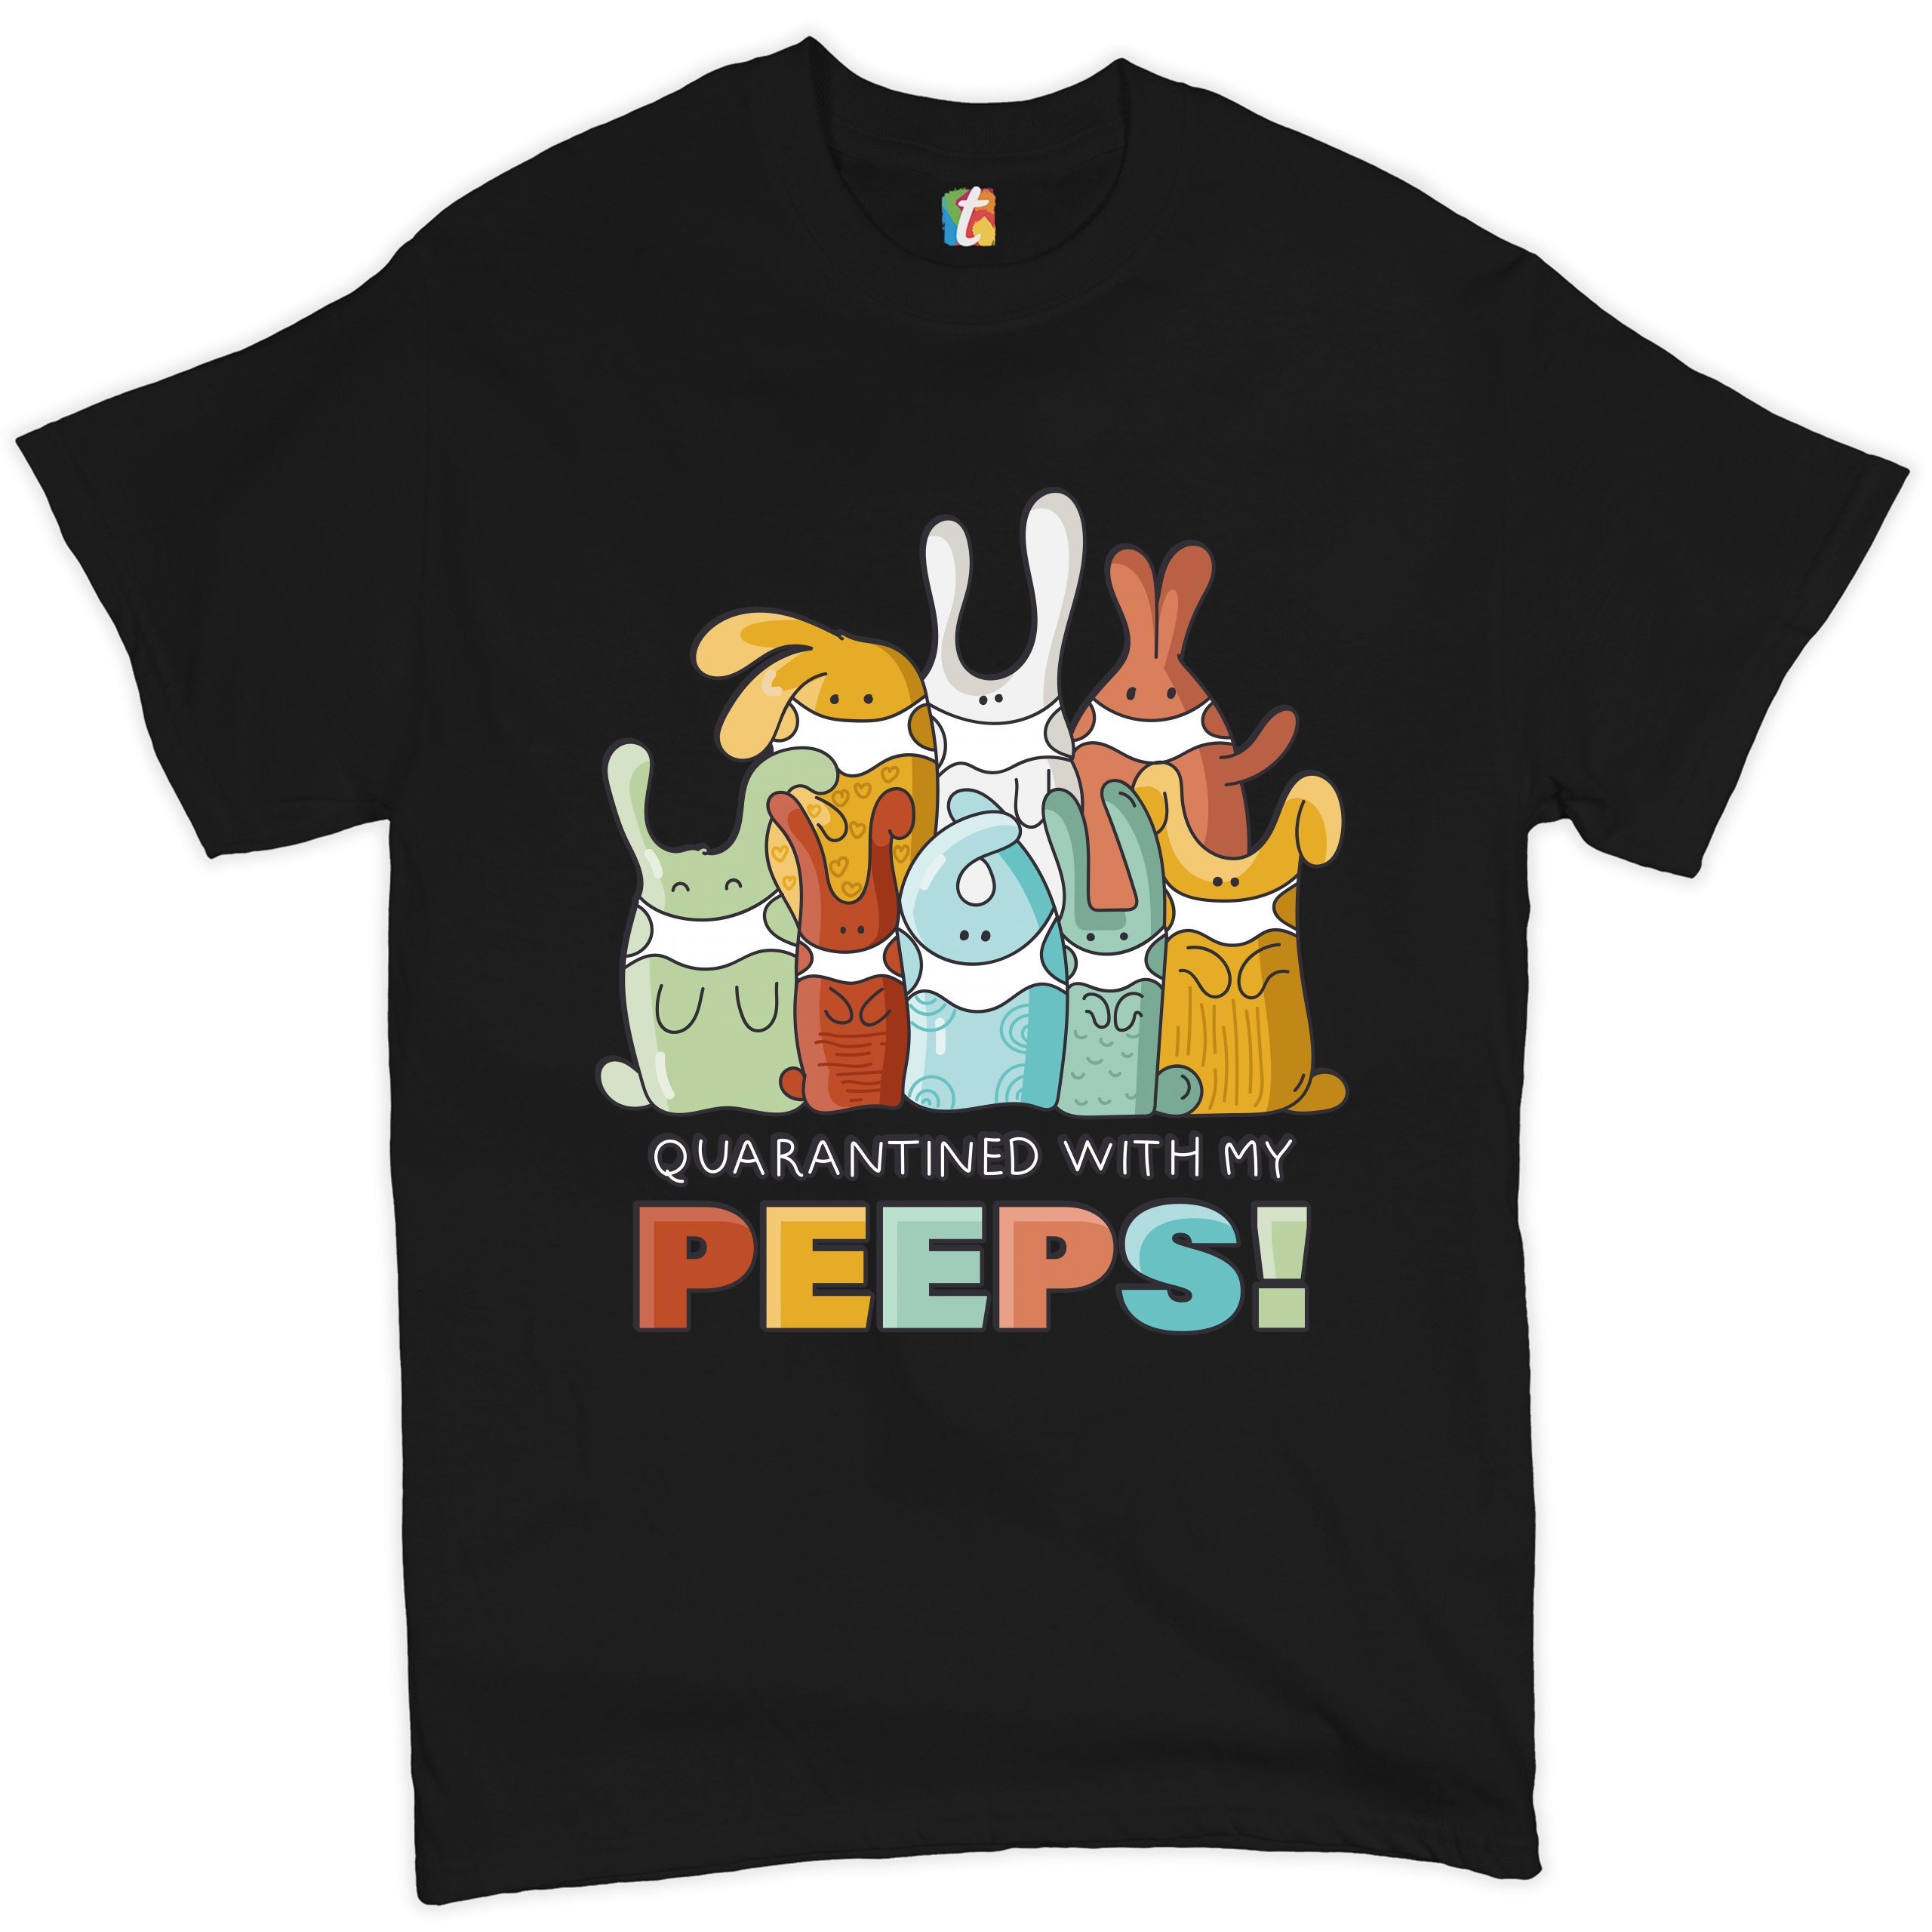 Rabbits Happy Easter Easter Eggs Women's Tee Holiday Social Distancing Lockdown Quarantined with My Peeps T-Shirt Easter Bunnies